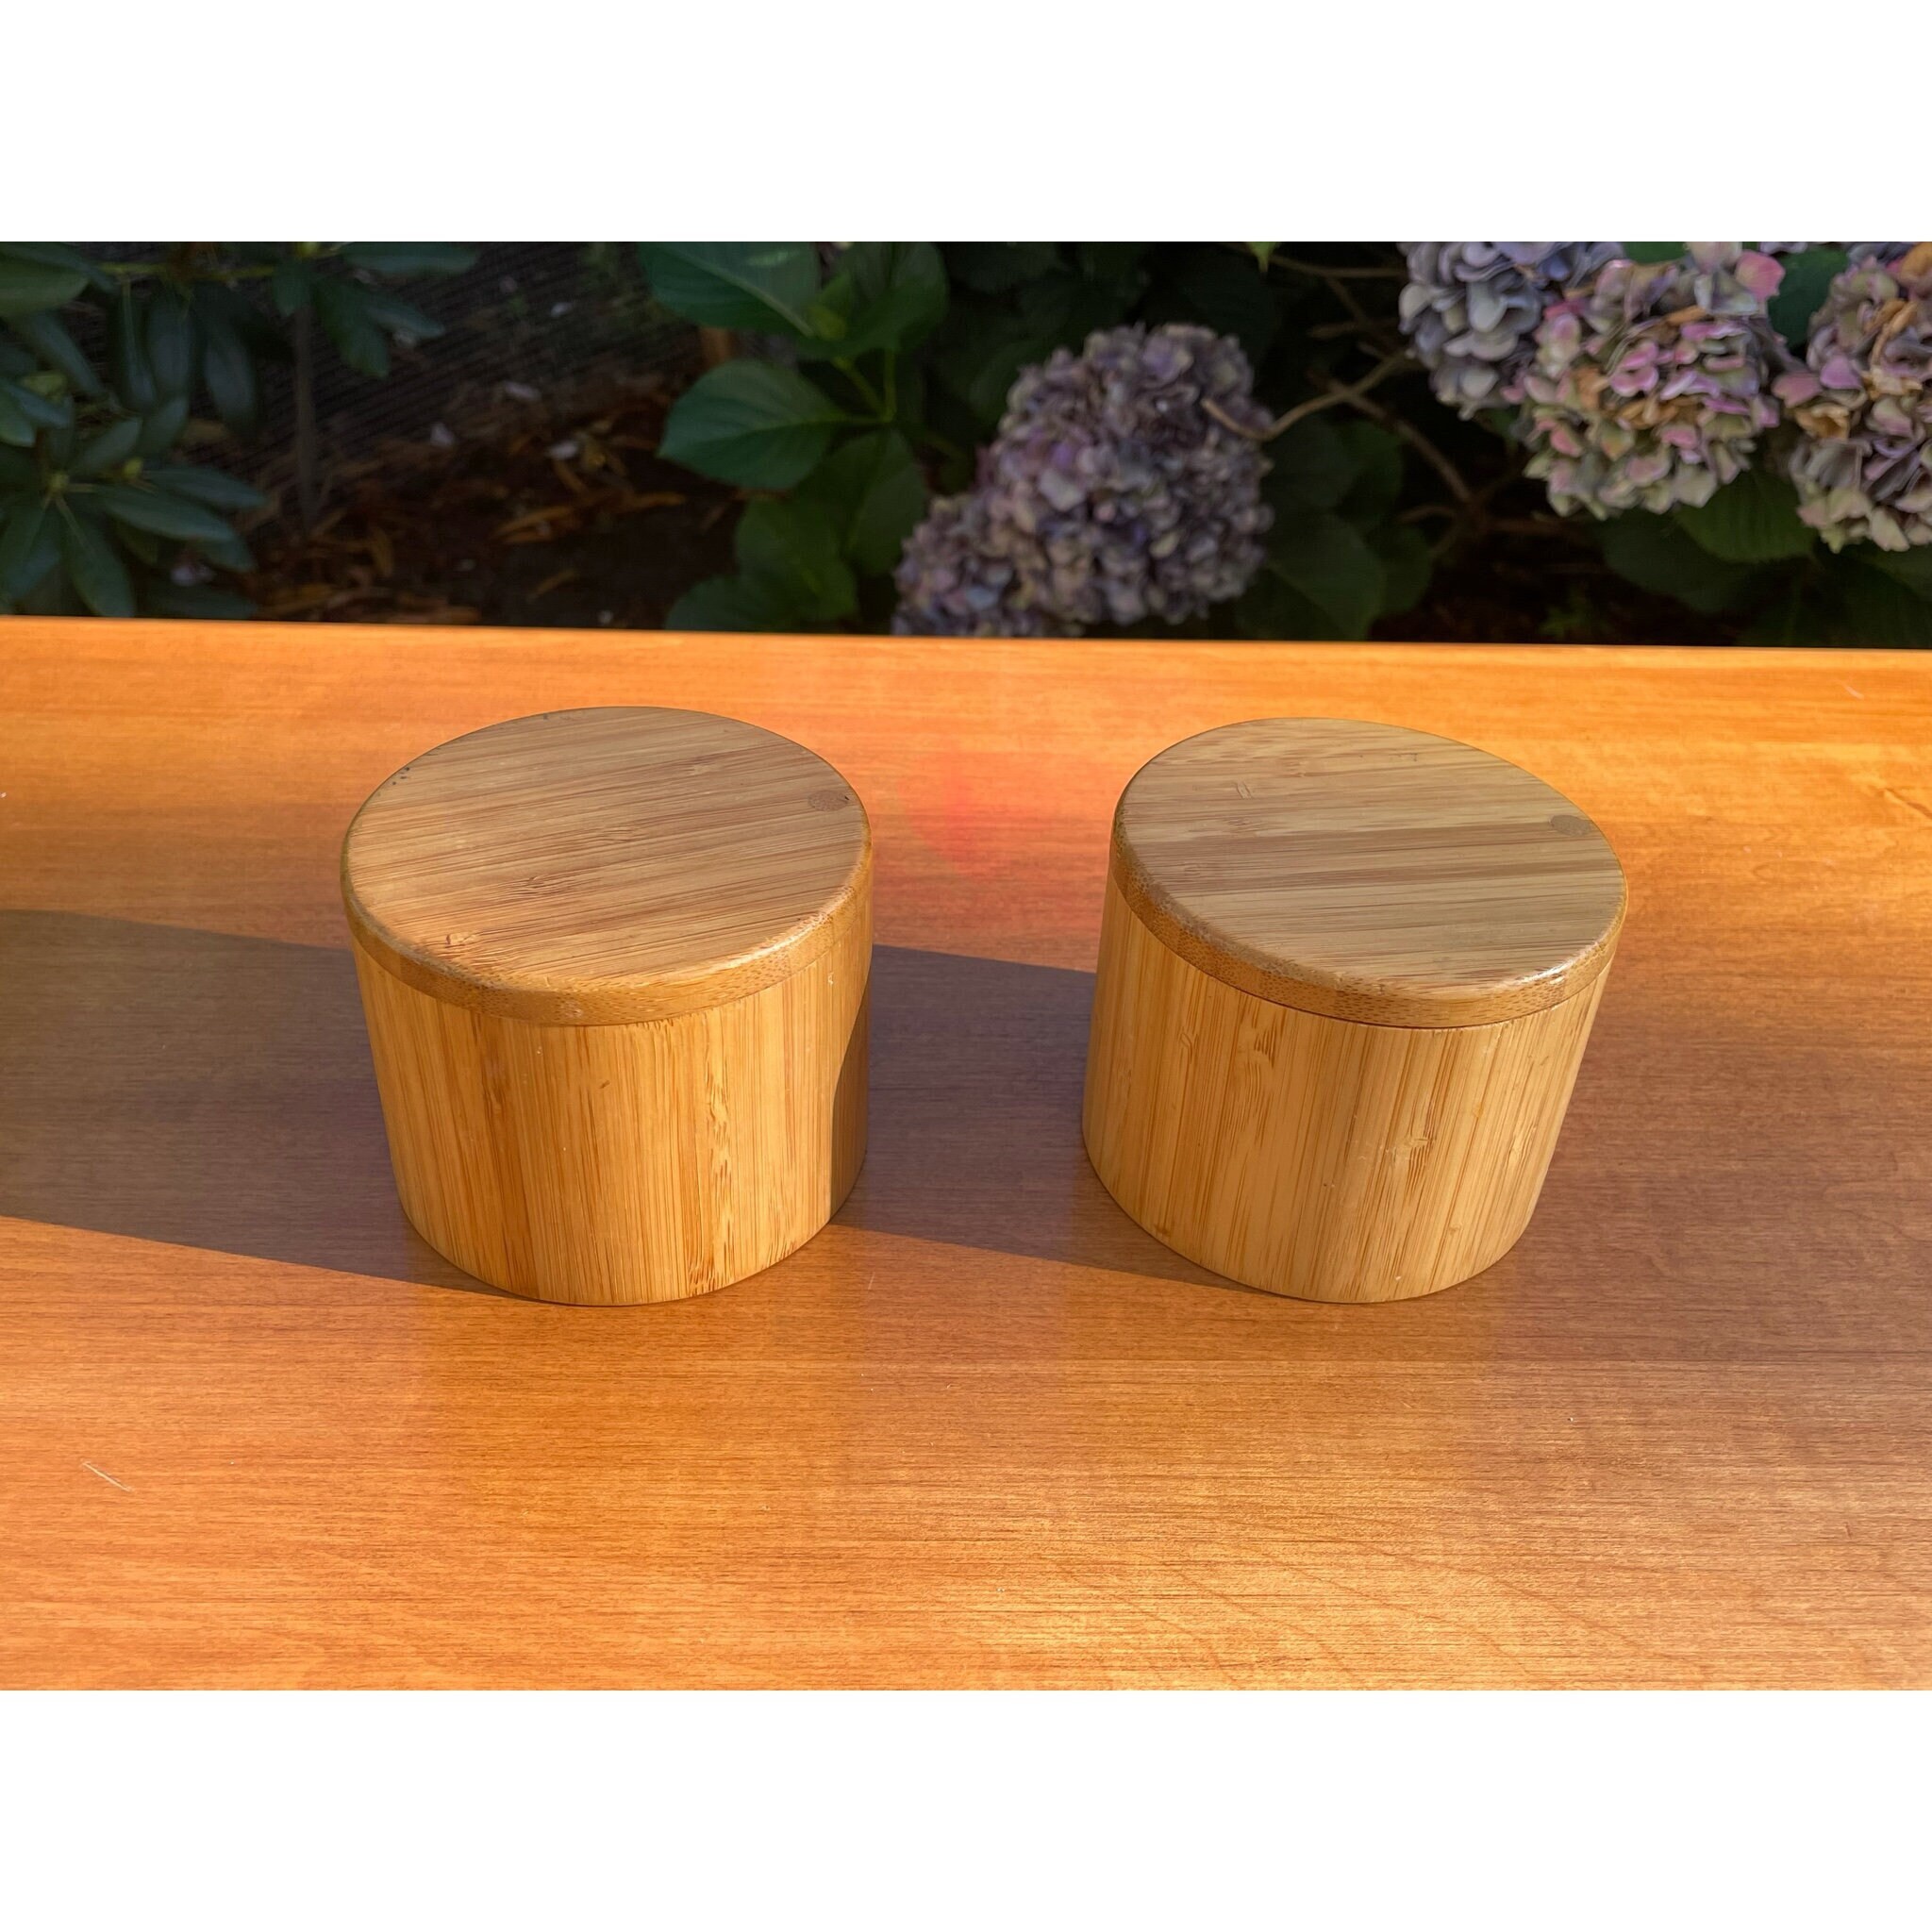 Large Bamboo Salt and Pepper Bowls by HTB, Divided Salt cellar with Swivel Lid and Spoon, Seasoning Containers with Magnetic Lid to Keep Dry, Mini Spo